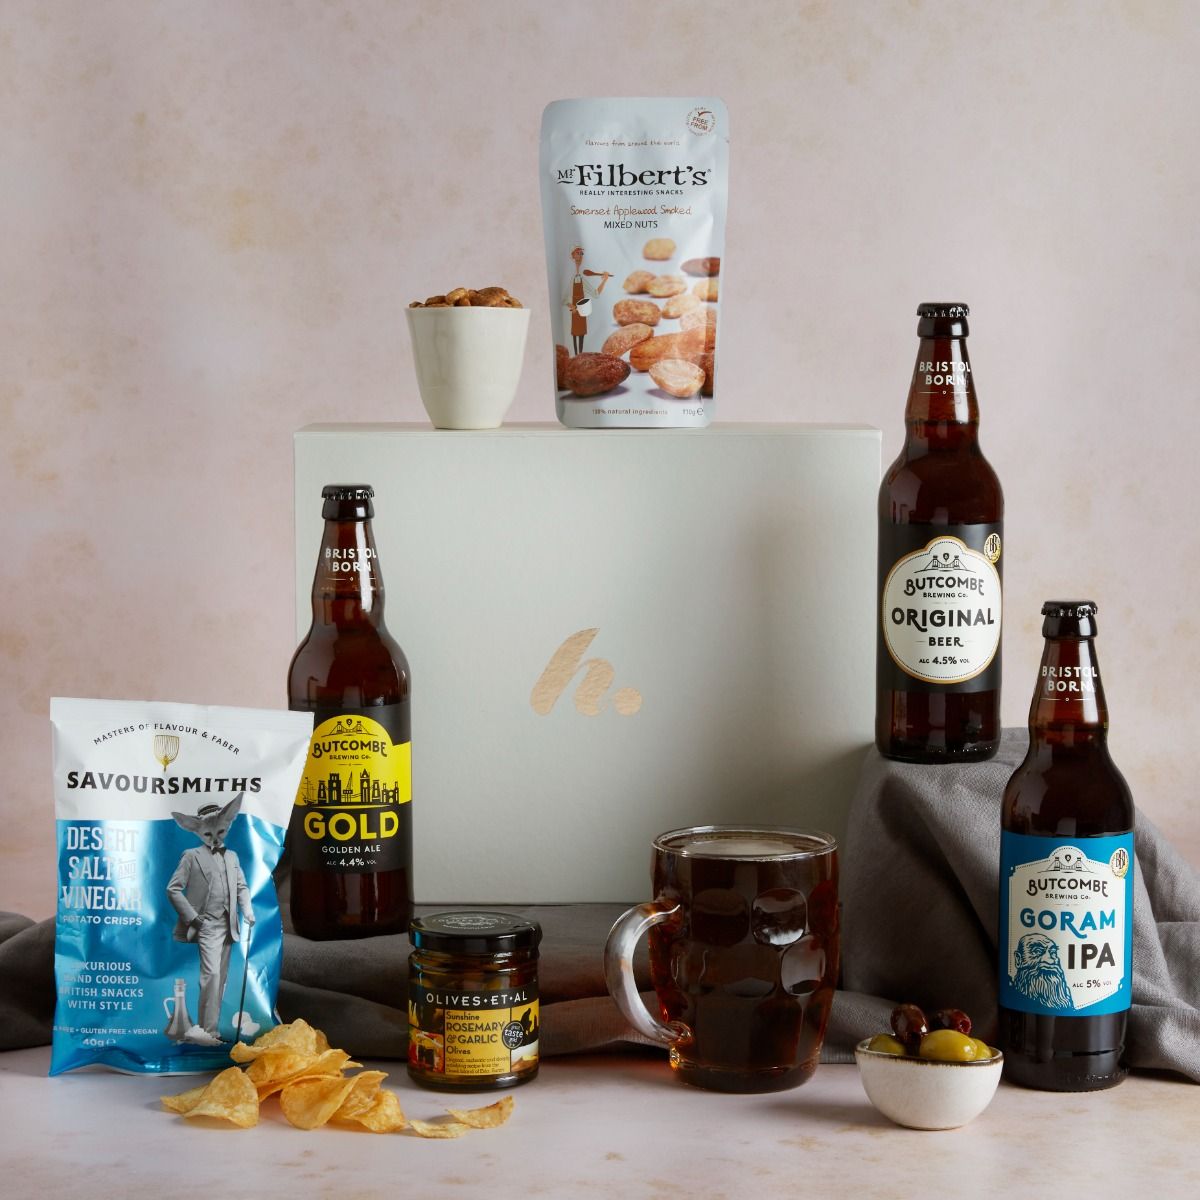 The Real Ale hamper with contents on display